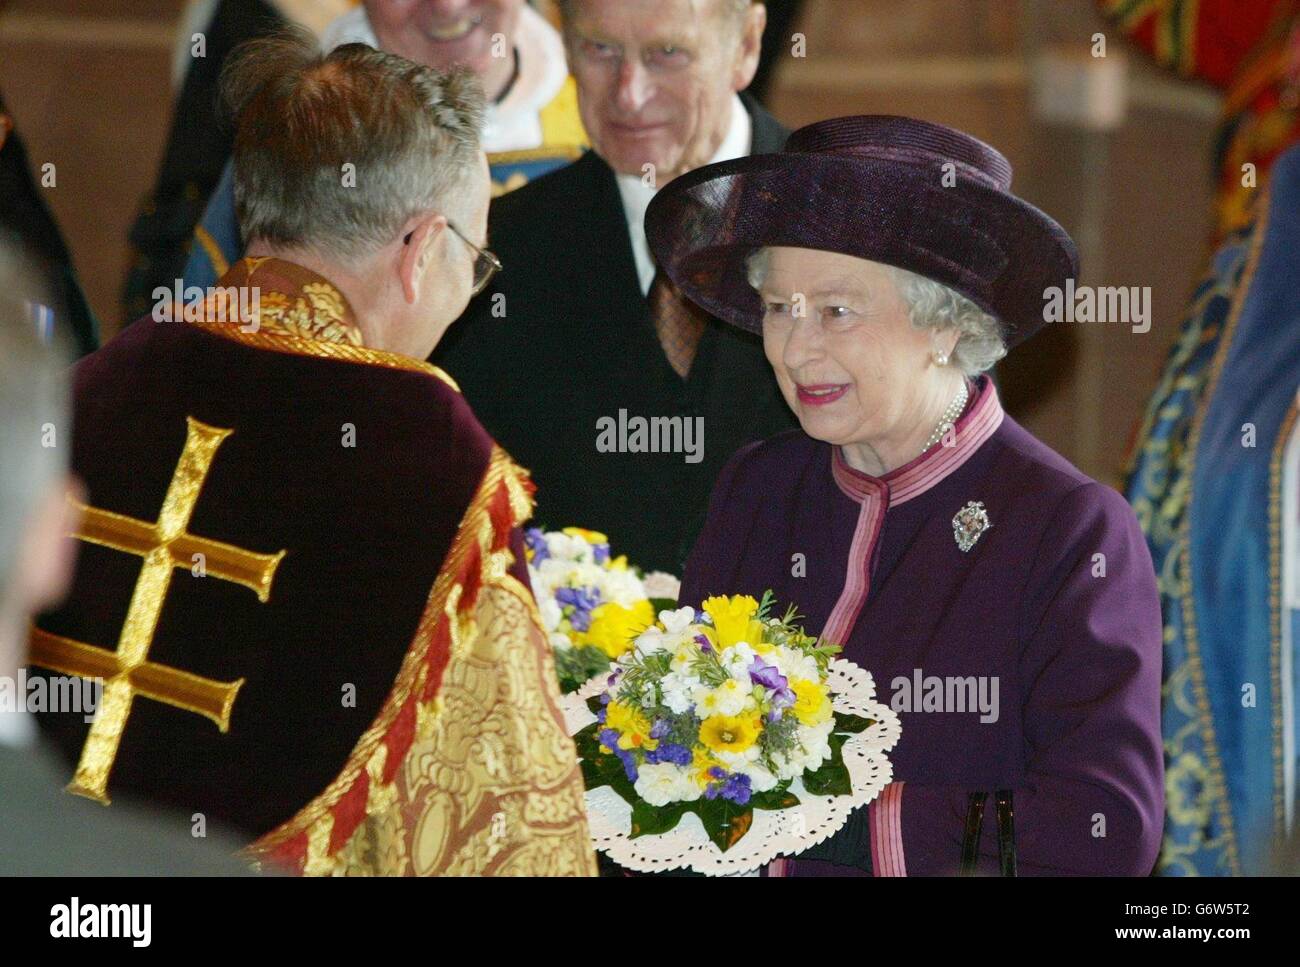 Queen Elizabeth II with the Duke of Edinburgh, is greeted by the Reverend Rupert Hoare, during the Royal Maundy Service held at Liverpool's Anglican Cathedral. The Queen arrived in Liverpool wearing a purple suit with a pink trim and matching hat, to take part in the ancient Maundy Thursday ceremony. Stock Photo